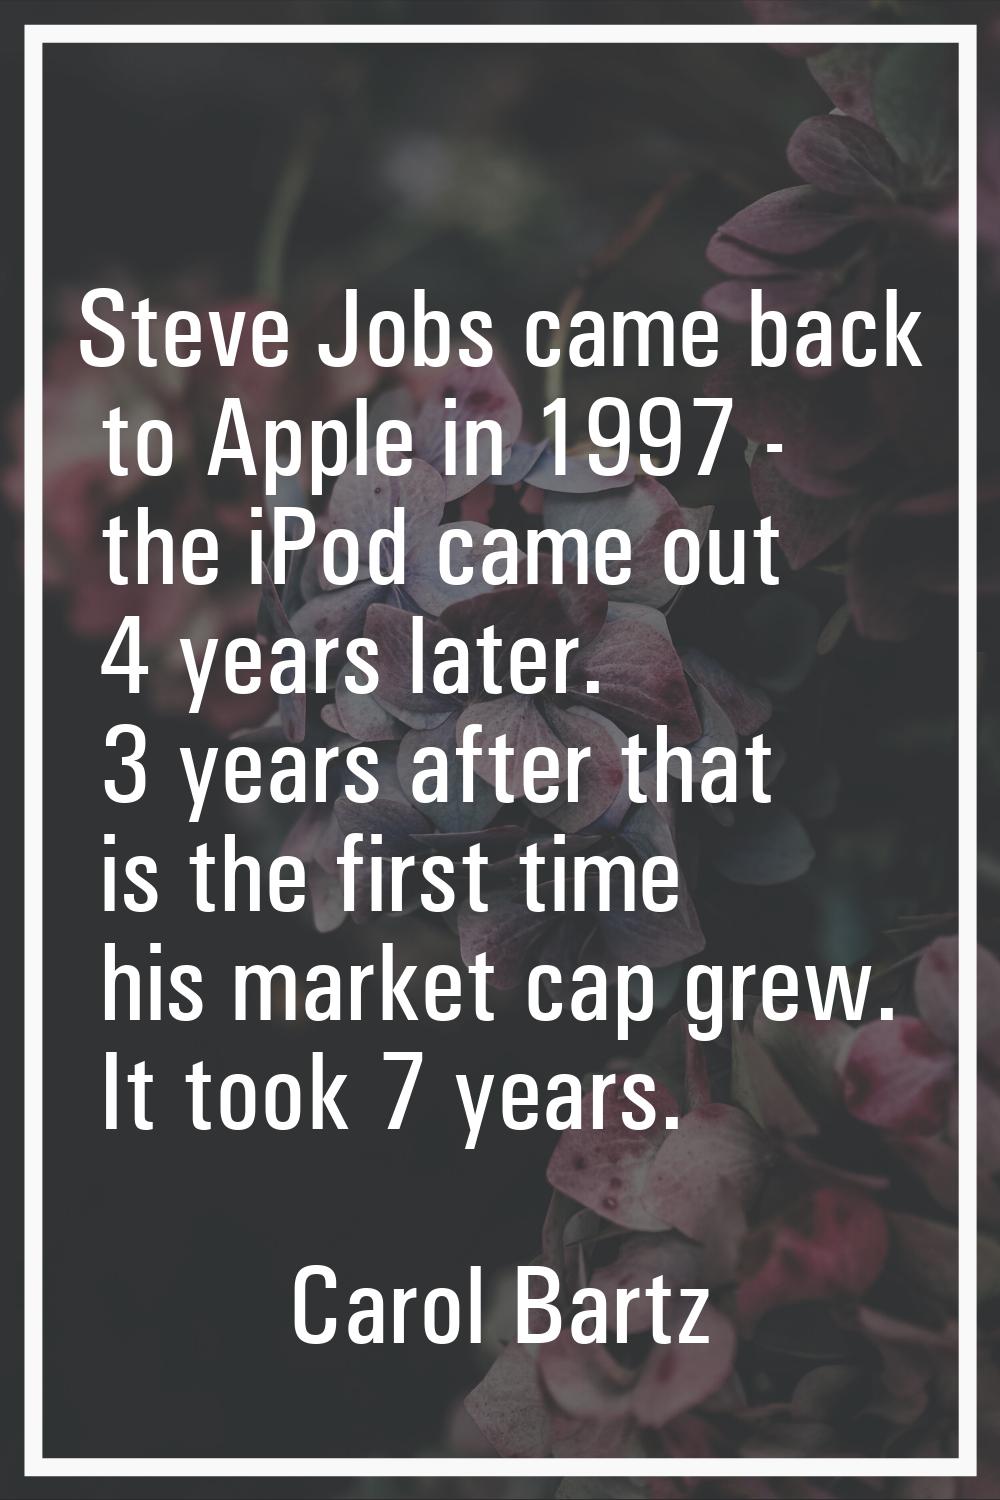 Steve Jobs came back to Apple in 1997 - the iPod came out 4 years later. 3 years after that is the 